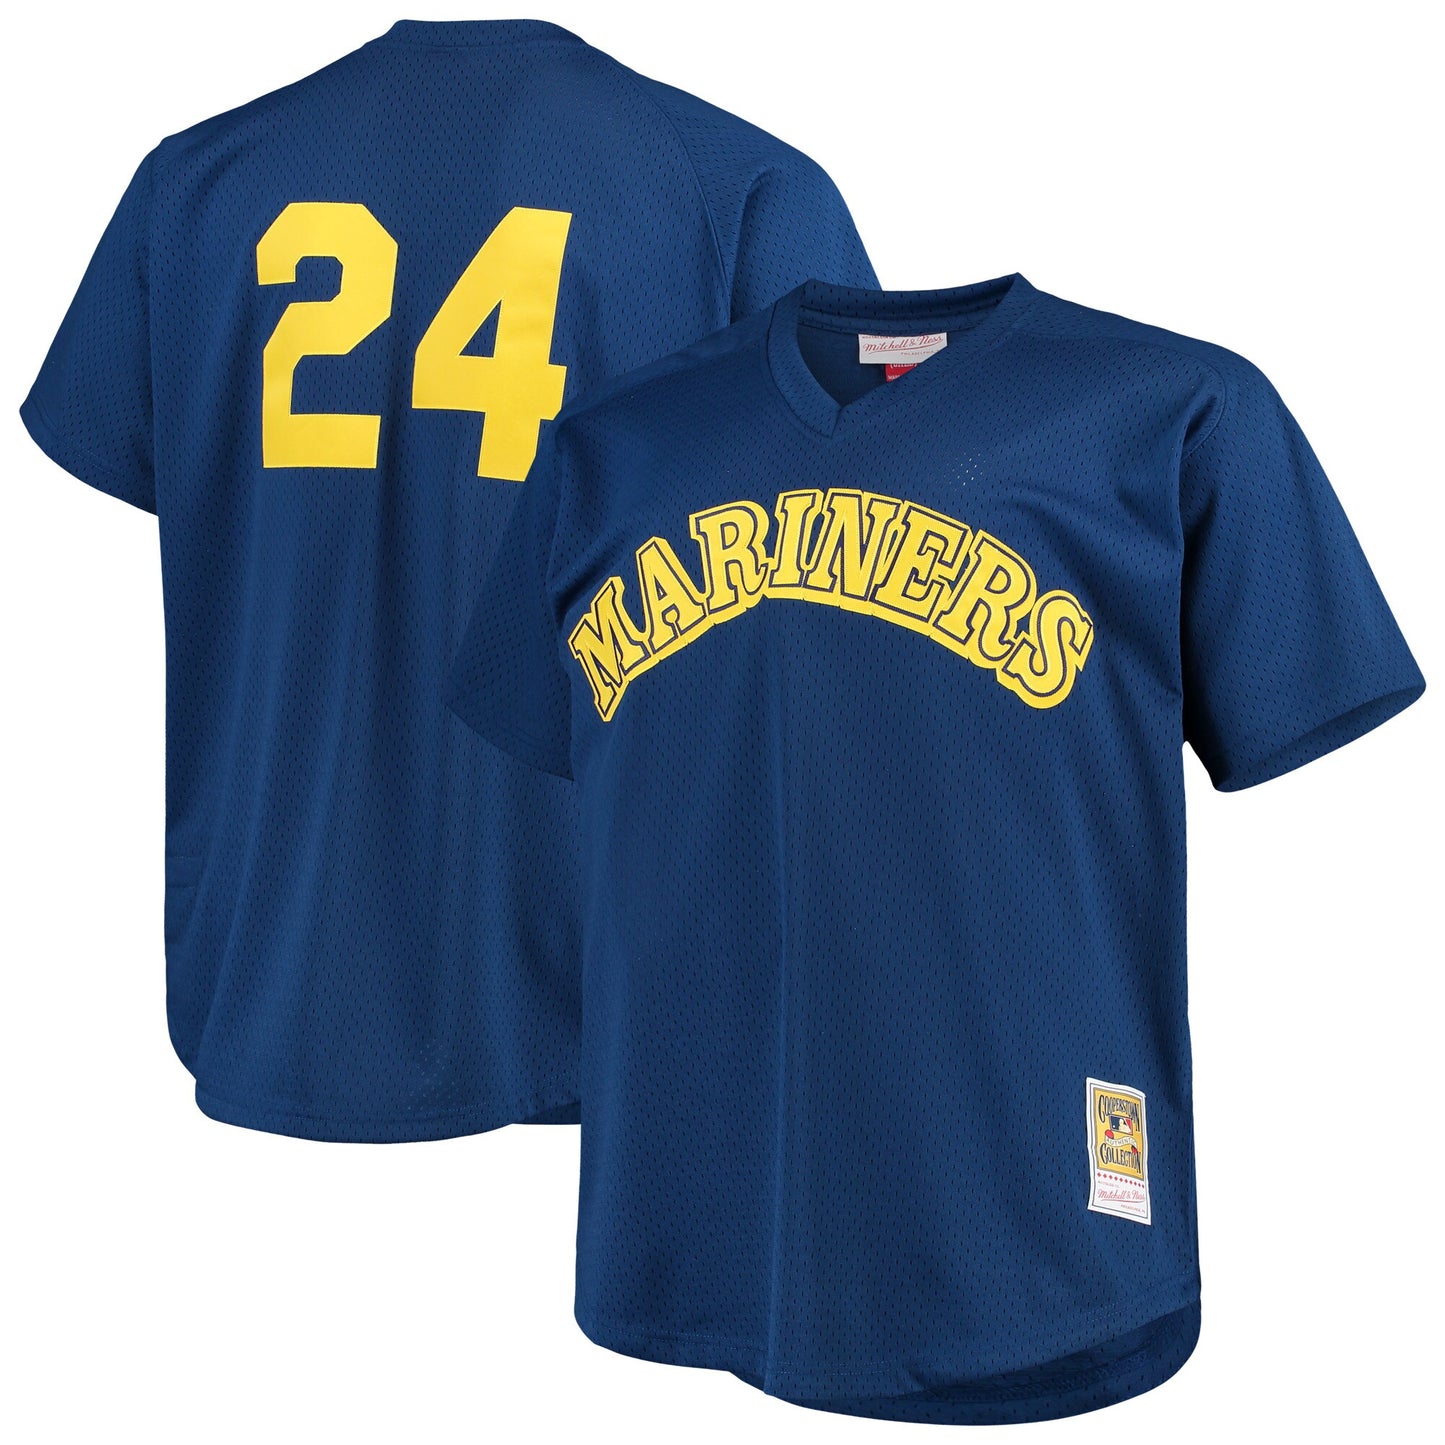 Ken Griffey Jr. Seattle Mariners Mitchell & Ness Big & Tall Cooperstown Collection Mesh Batting Practice Jersey - Royal